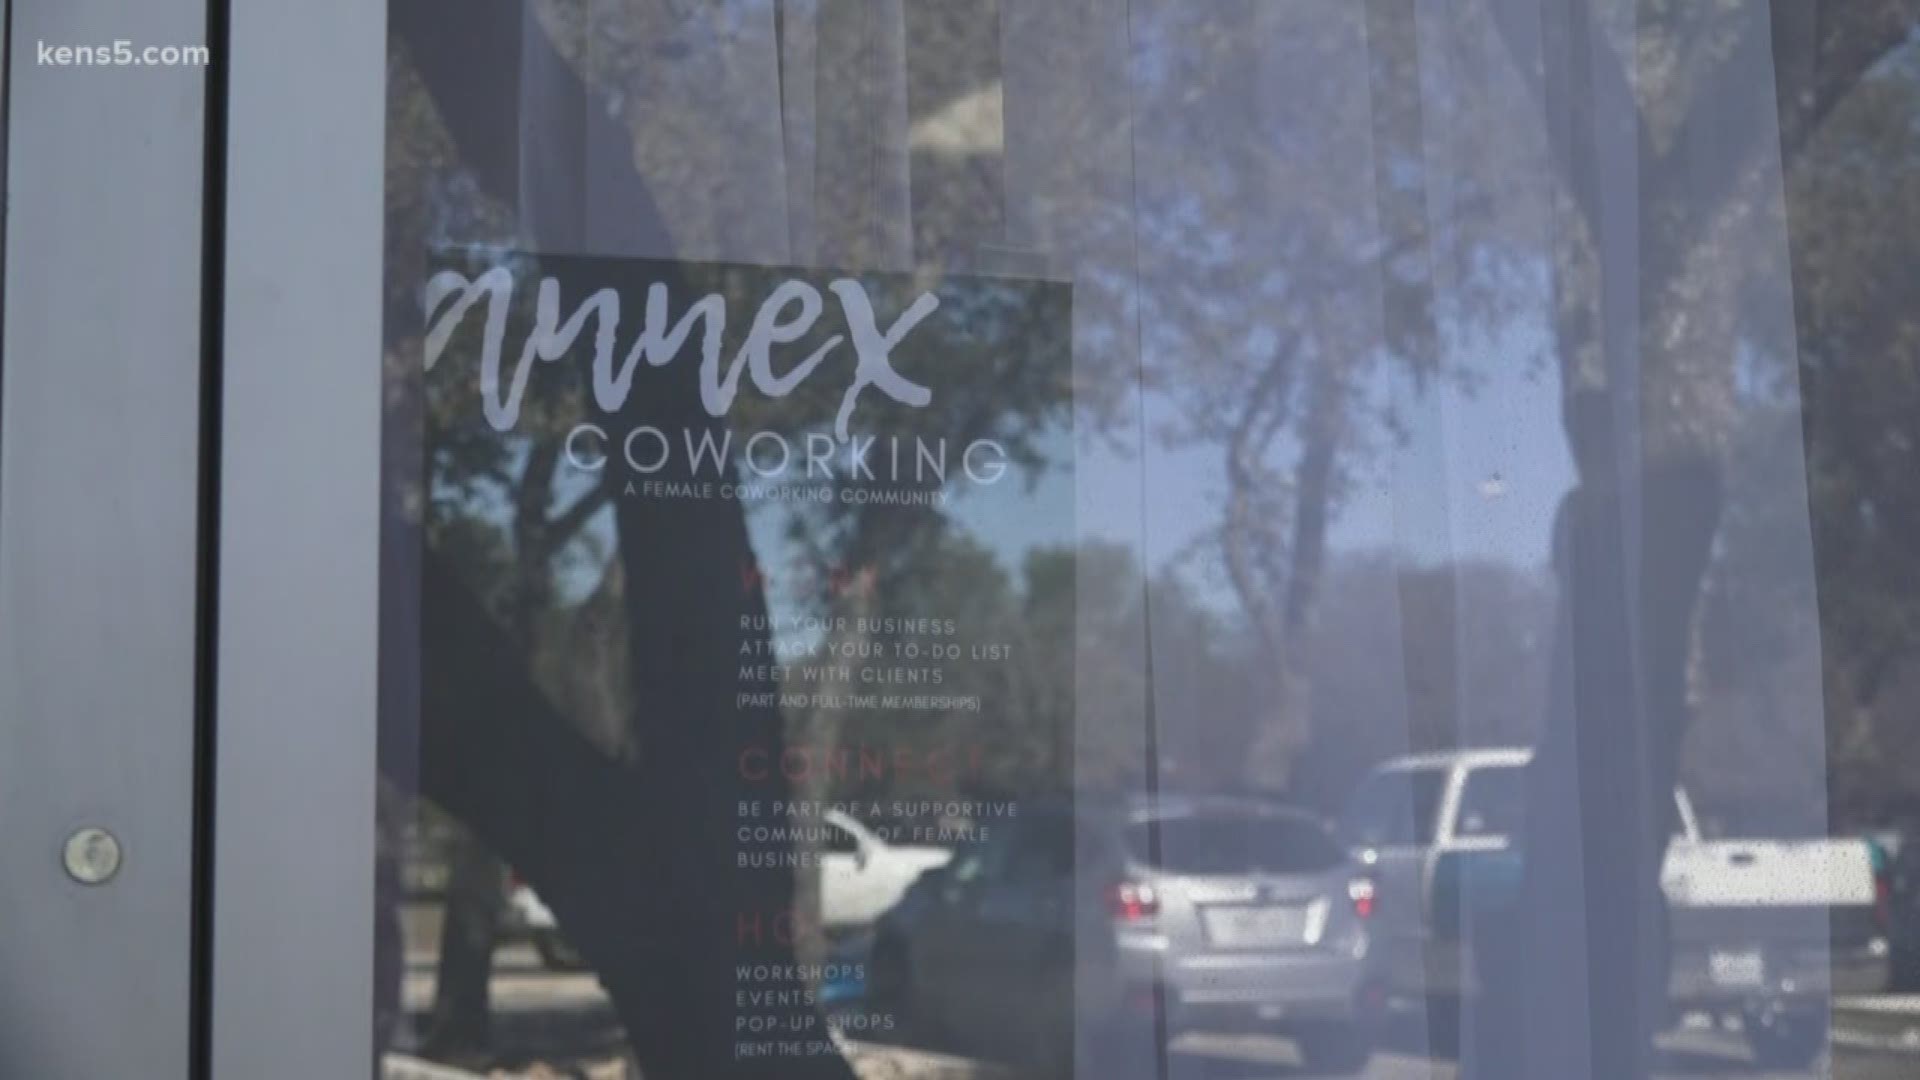 San Antonio is now home to a unique opportunity, specifically for woman who want to start a small business, or even just work remotely. Eyewitness News reporter Erica Zucco is live.